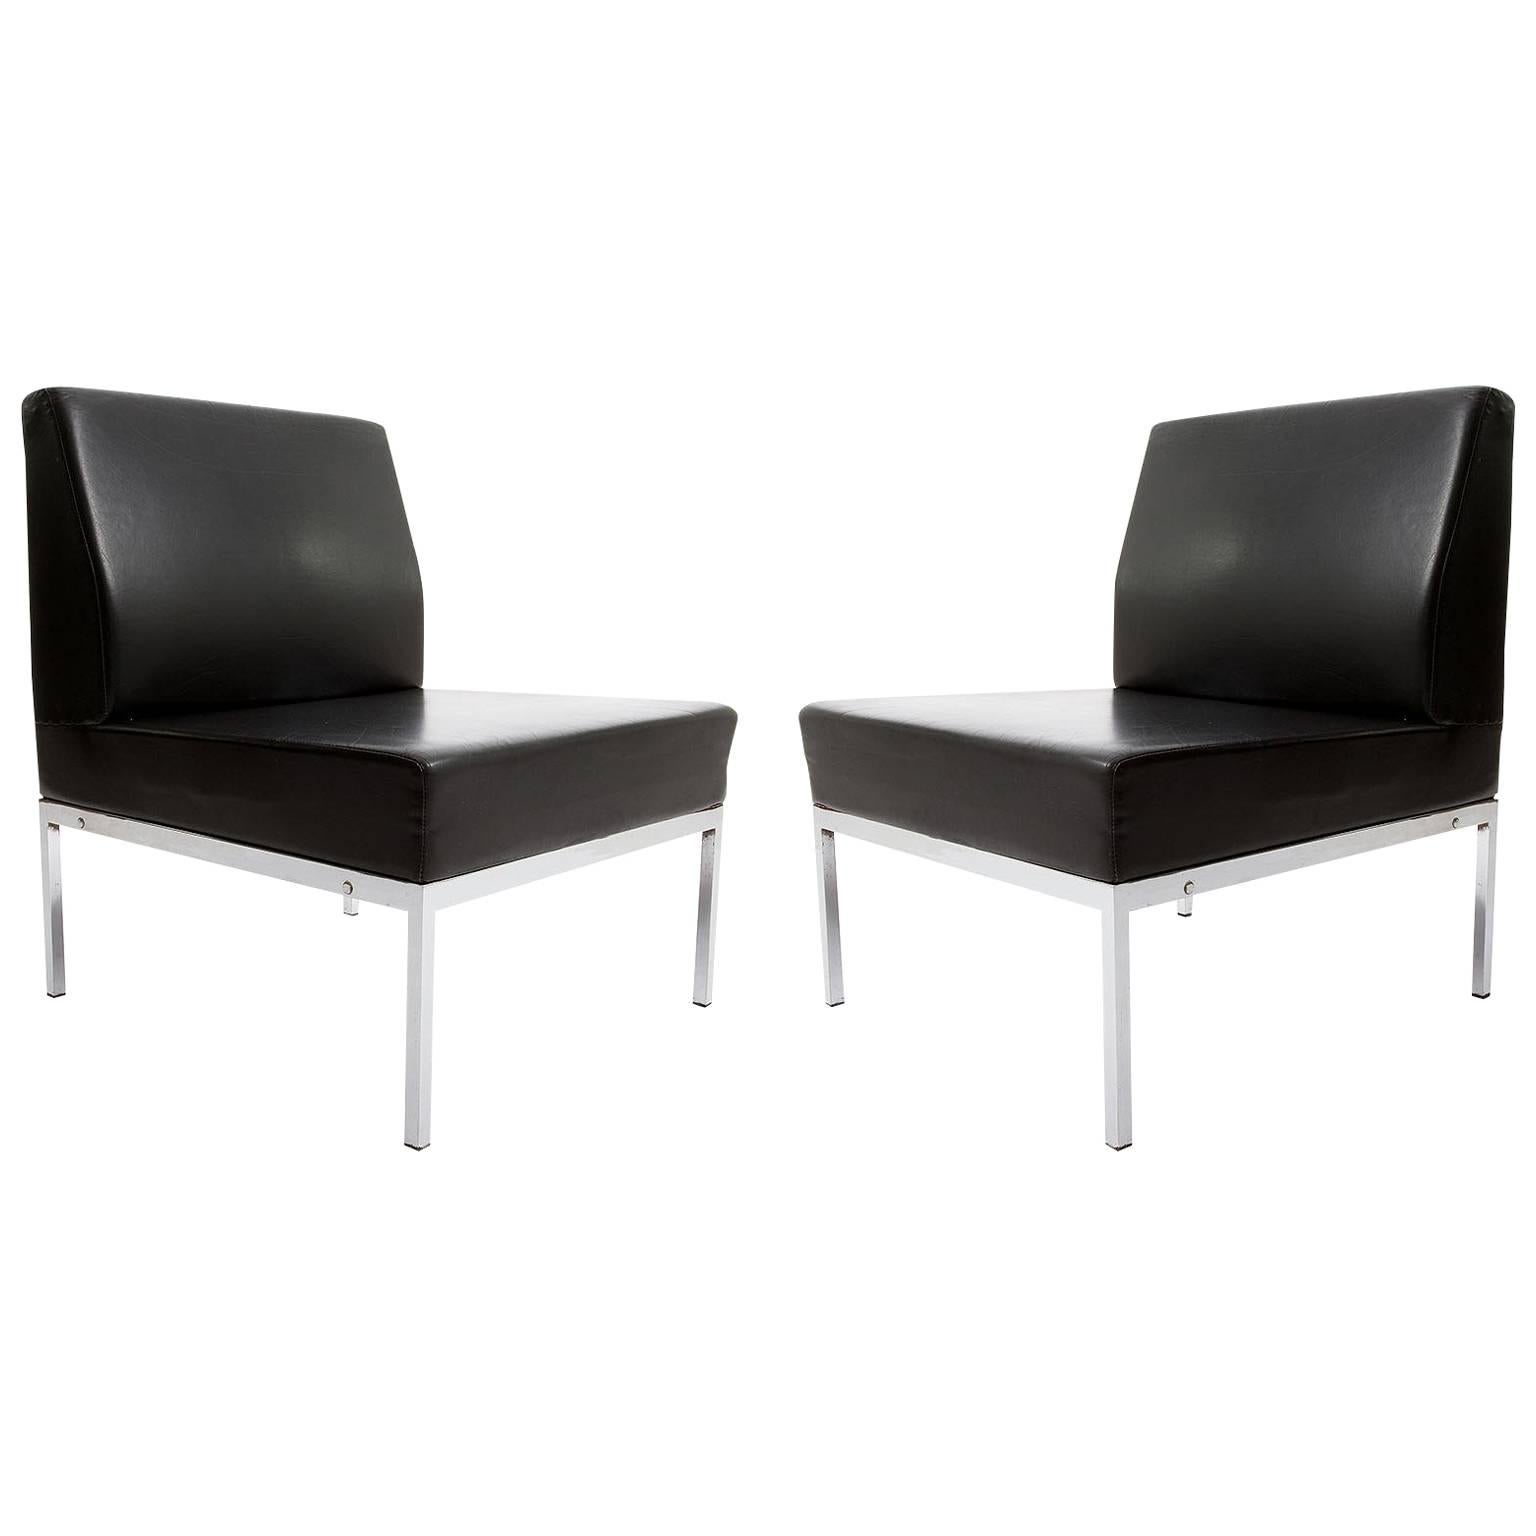 Pair of Lounge Chairs, Black Leather Chrome, Attributed to Thonet, 1970